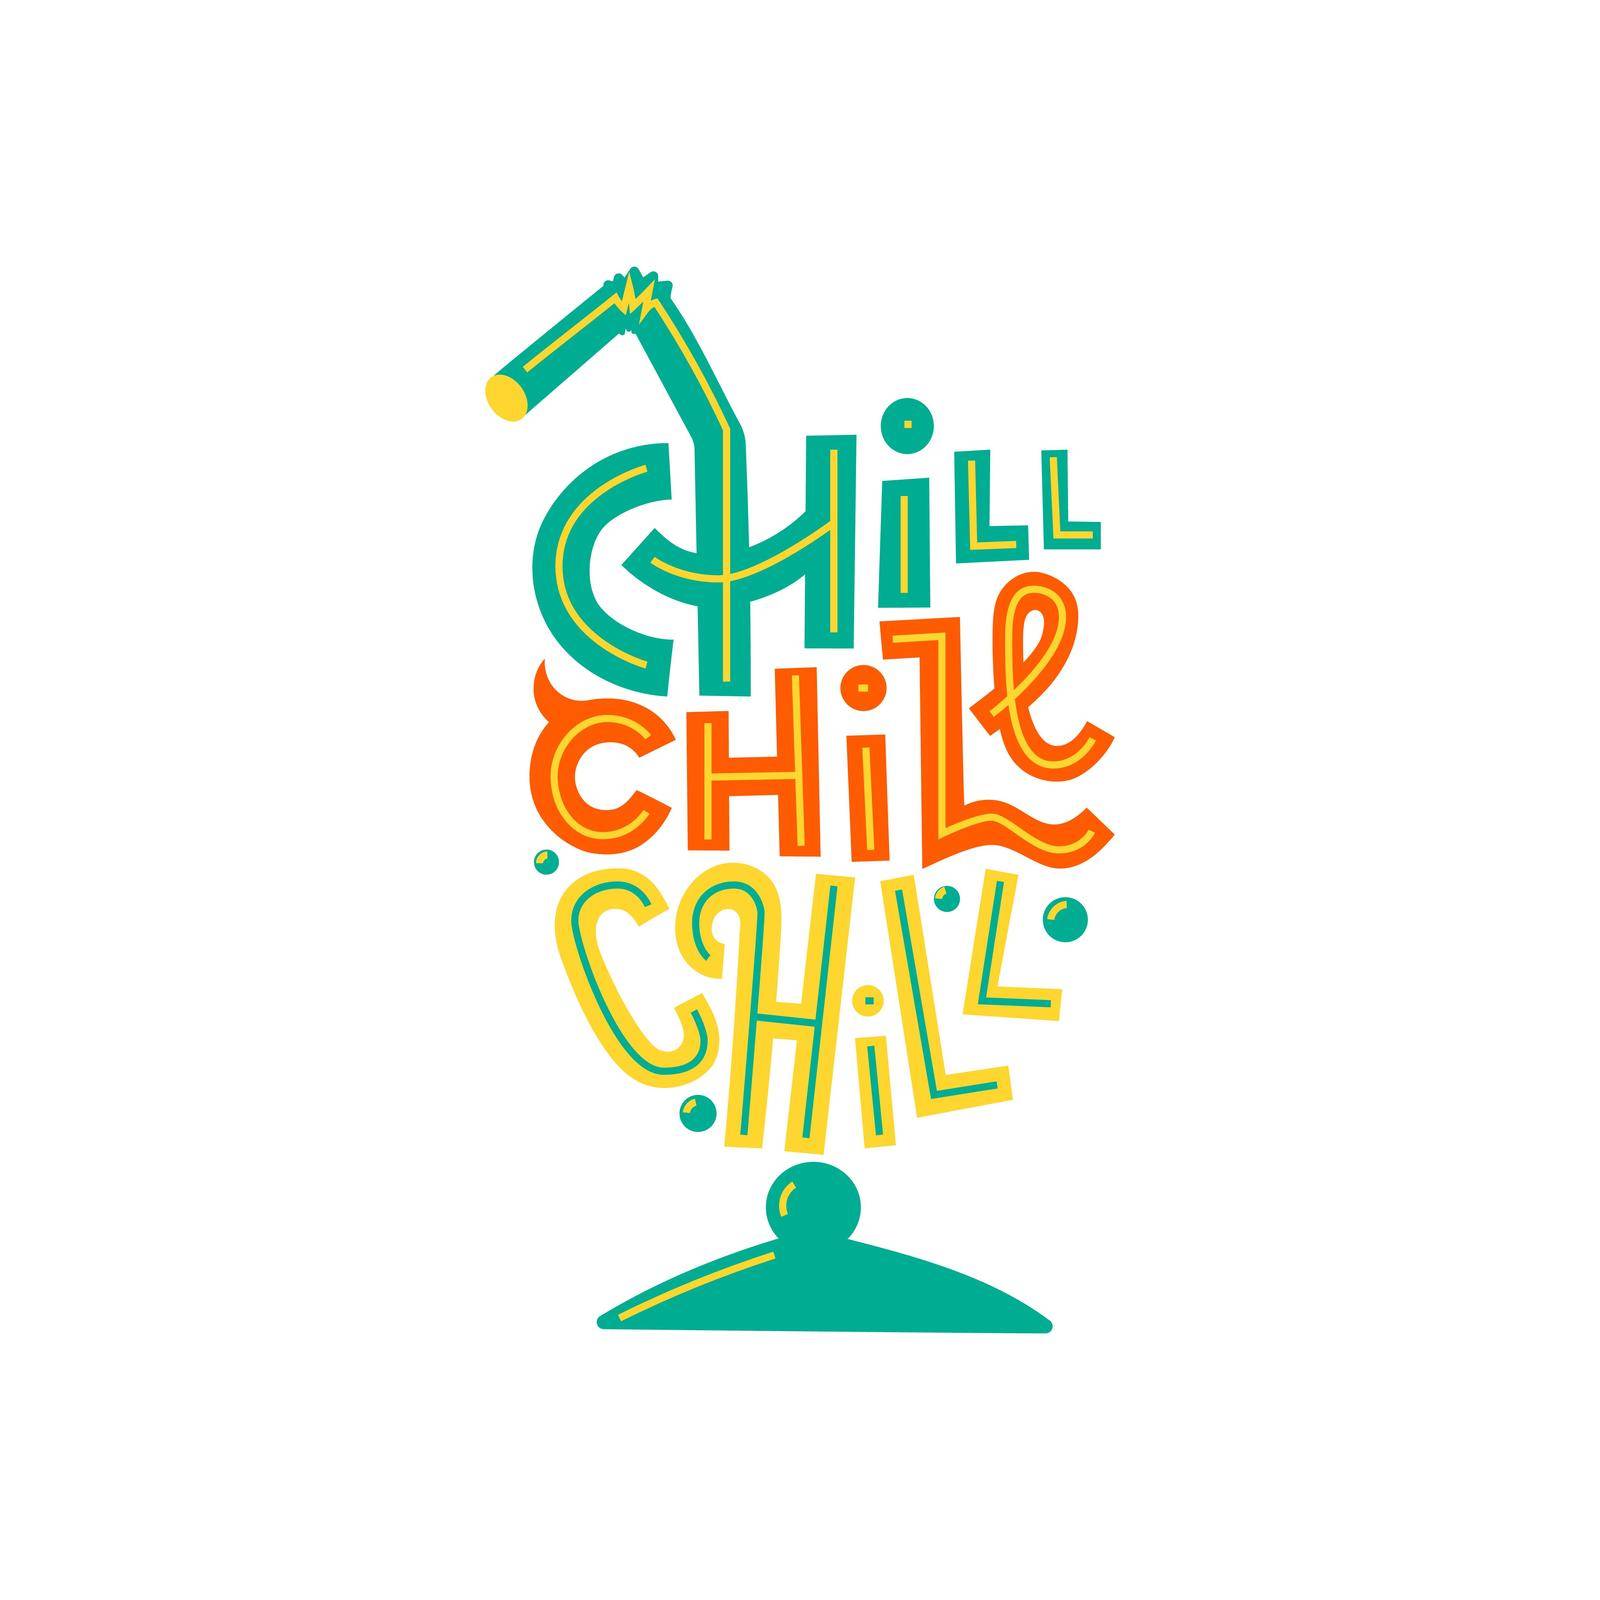 Chill, chill, chill lettering art. Summer cocktail shape. Colorful flat illustration, isolated on white background